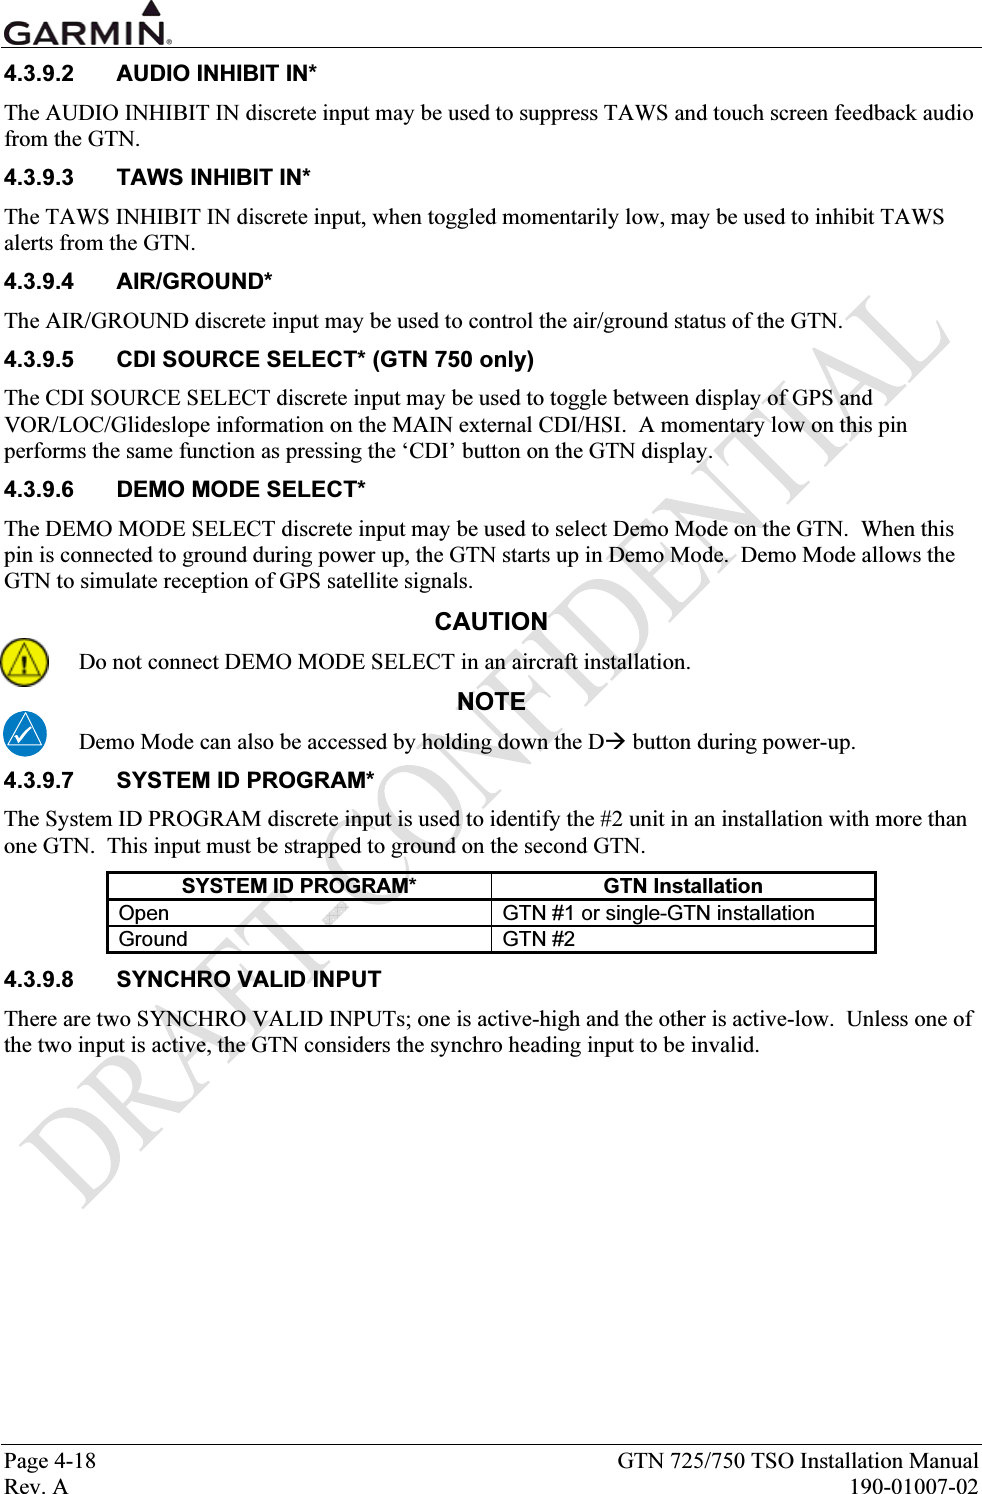  Page 4-18  GTN 725/750 TSO Installation Manual Rev. A  190-01007-02 4.3.9.2  AUDIO INHIBIT IN* The AUDIO INHIBIT IN discrete input may be used to suppress TAWS and touch screen feedback audio from the GTN. 4.3.9.3  TAWS INHIBIT IN* The TAWS INHIBIT IN discrete input, when toggled momentarily low, may be used to inhibit TAWS alerts from the GTN.   4.3.9.4 AIR/GROUND* The AIR/GROUND discrete input may be used to control the air/ground status of the GTN. 4.3.9.5  CDI SOURCE SELECT* (GTN 750 only) The CDI SOURCE SELECT discrete input may be used to toggle between display of GPS and VOR/LOC/Glideslope information on the MAIN external CDI/HSI.  A momentary low on this pin performs the same function as pressing the ‘CDI’ button on the GTN display. 4.3.9.6 DEMO MODE SELECT* The DEMO MODE SELECT discrete input may be used to select Demo Mode on the GTN.  When this pin is connected to ground during power up, the GTN starts up in Demo Mode.  Demo Mode allows the GTN to simulate reception of GPS satellite signals. CAUTION Do not connect DEMO MODE SELECT in an aircraft installation. NOTE Demo Mode can also be accessed by holding down the D button during power-up. 4.3.9.7  SYSTEM ID PROGRAM* The System ID PROGRAM discrete input is used to identify the #2 unit in an installation with more than one GTN.  This input must be strapped to ground on the second GTN. SYSTEM ID PROGRAM*  GTN Installation Open  GTN #1 or single-GTN installation Ground GTN #2 4.3.9.8 SYNCHRO VALID INPUT There are two SYNCHRO VALID INPUTs; one is active-high and the other is active-low.  Unless one of the two input is active, the GTN considers the synchro heading input to be invalid. 